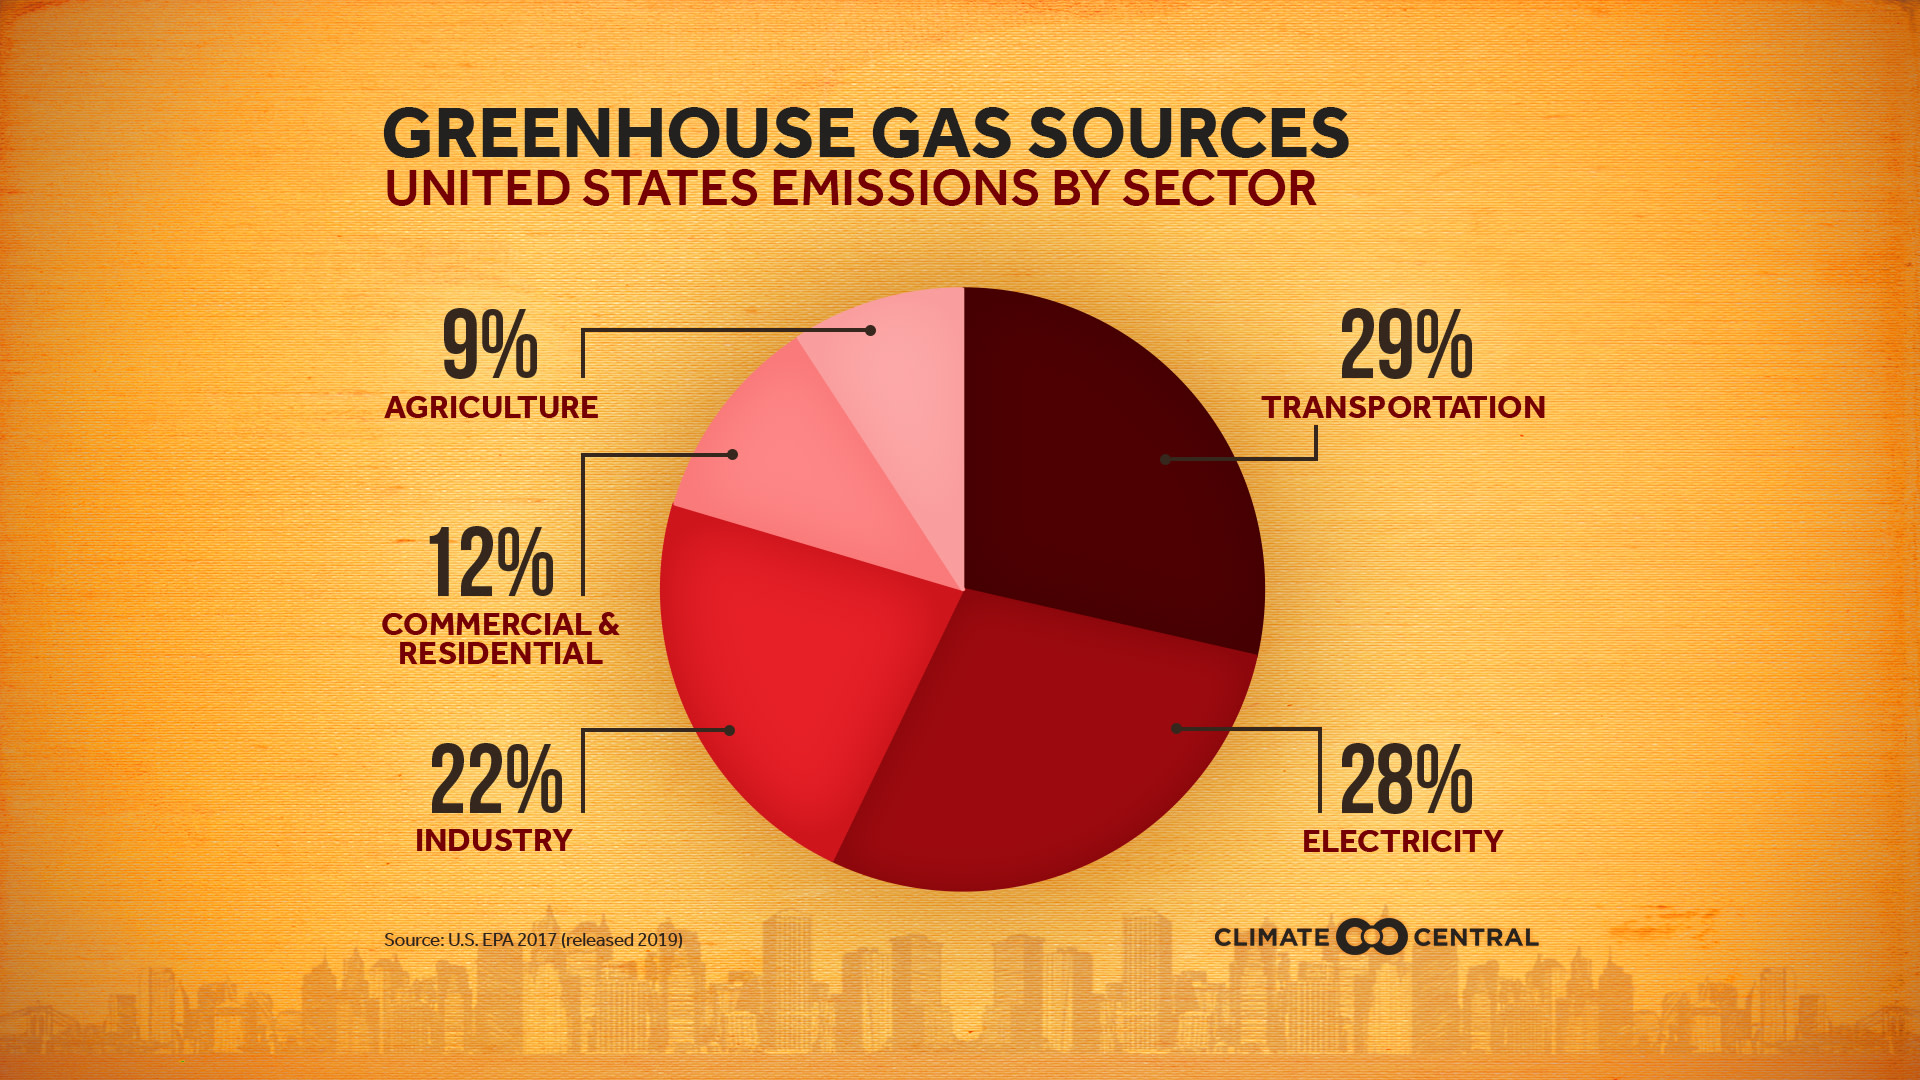 Set 2 - National and Global Emissions Sources (2020)